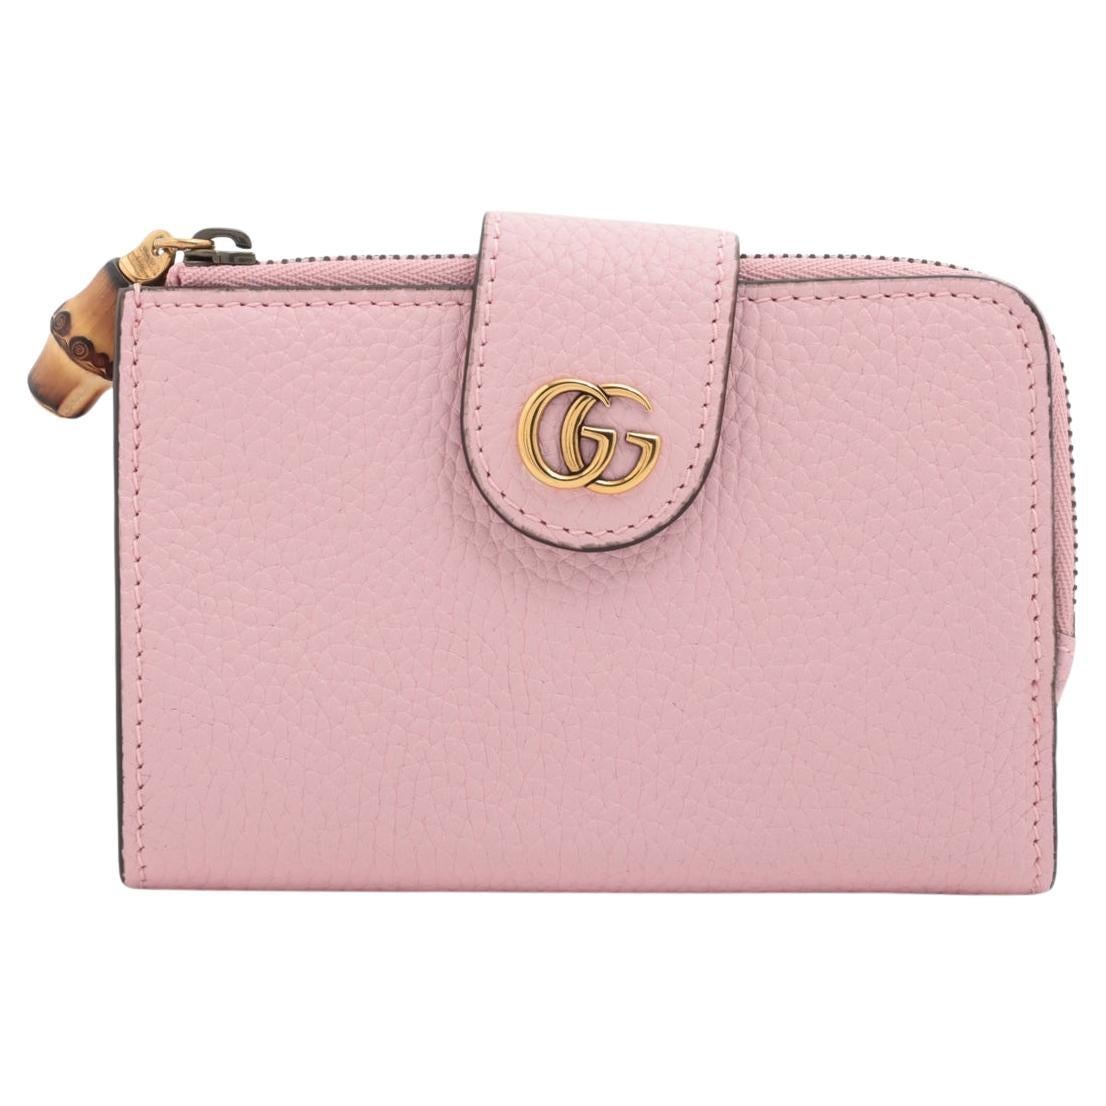 Gucci Bamboo Double G Leather Bi-fold Wallet Pink For Sale